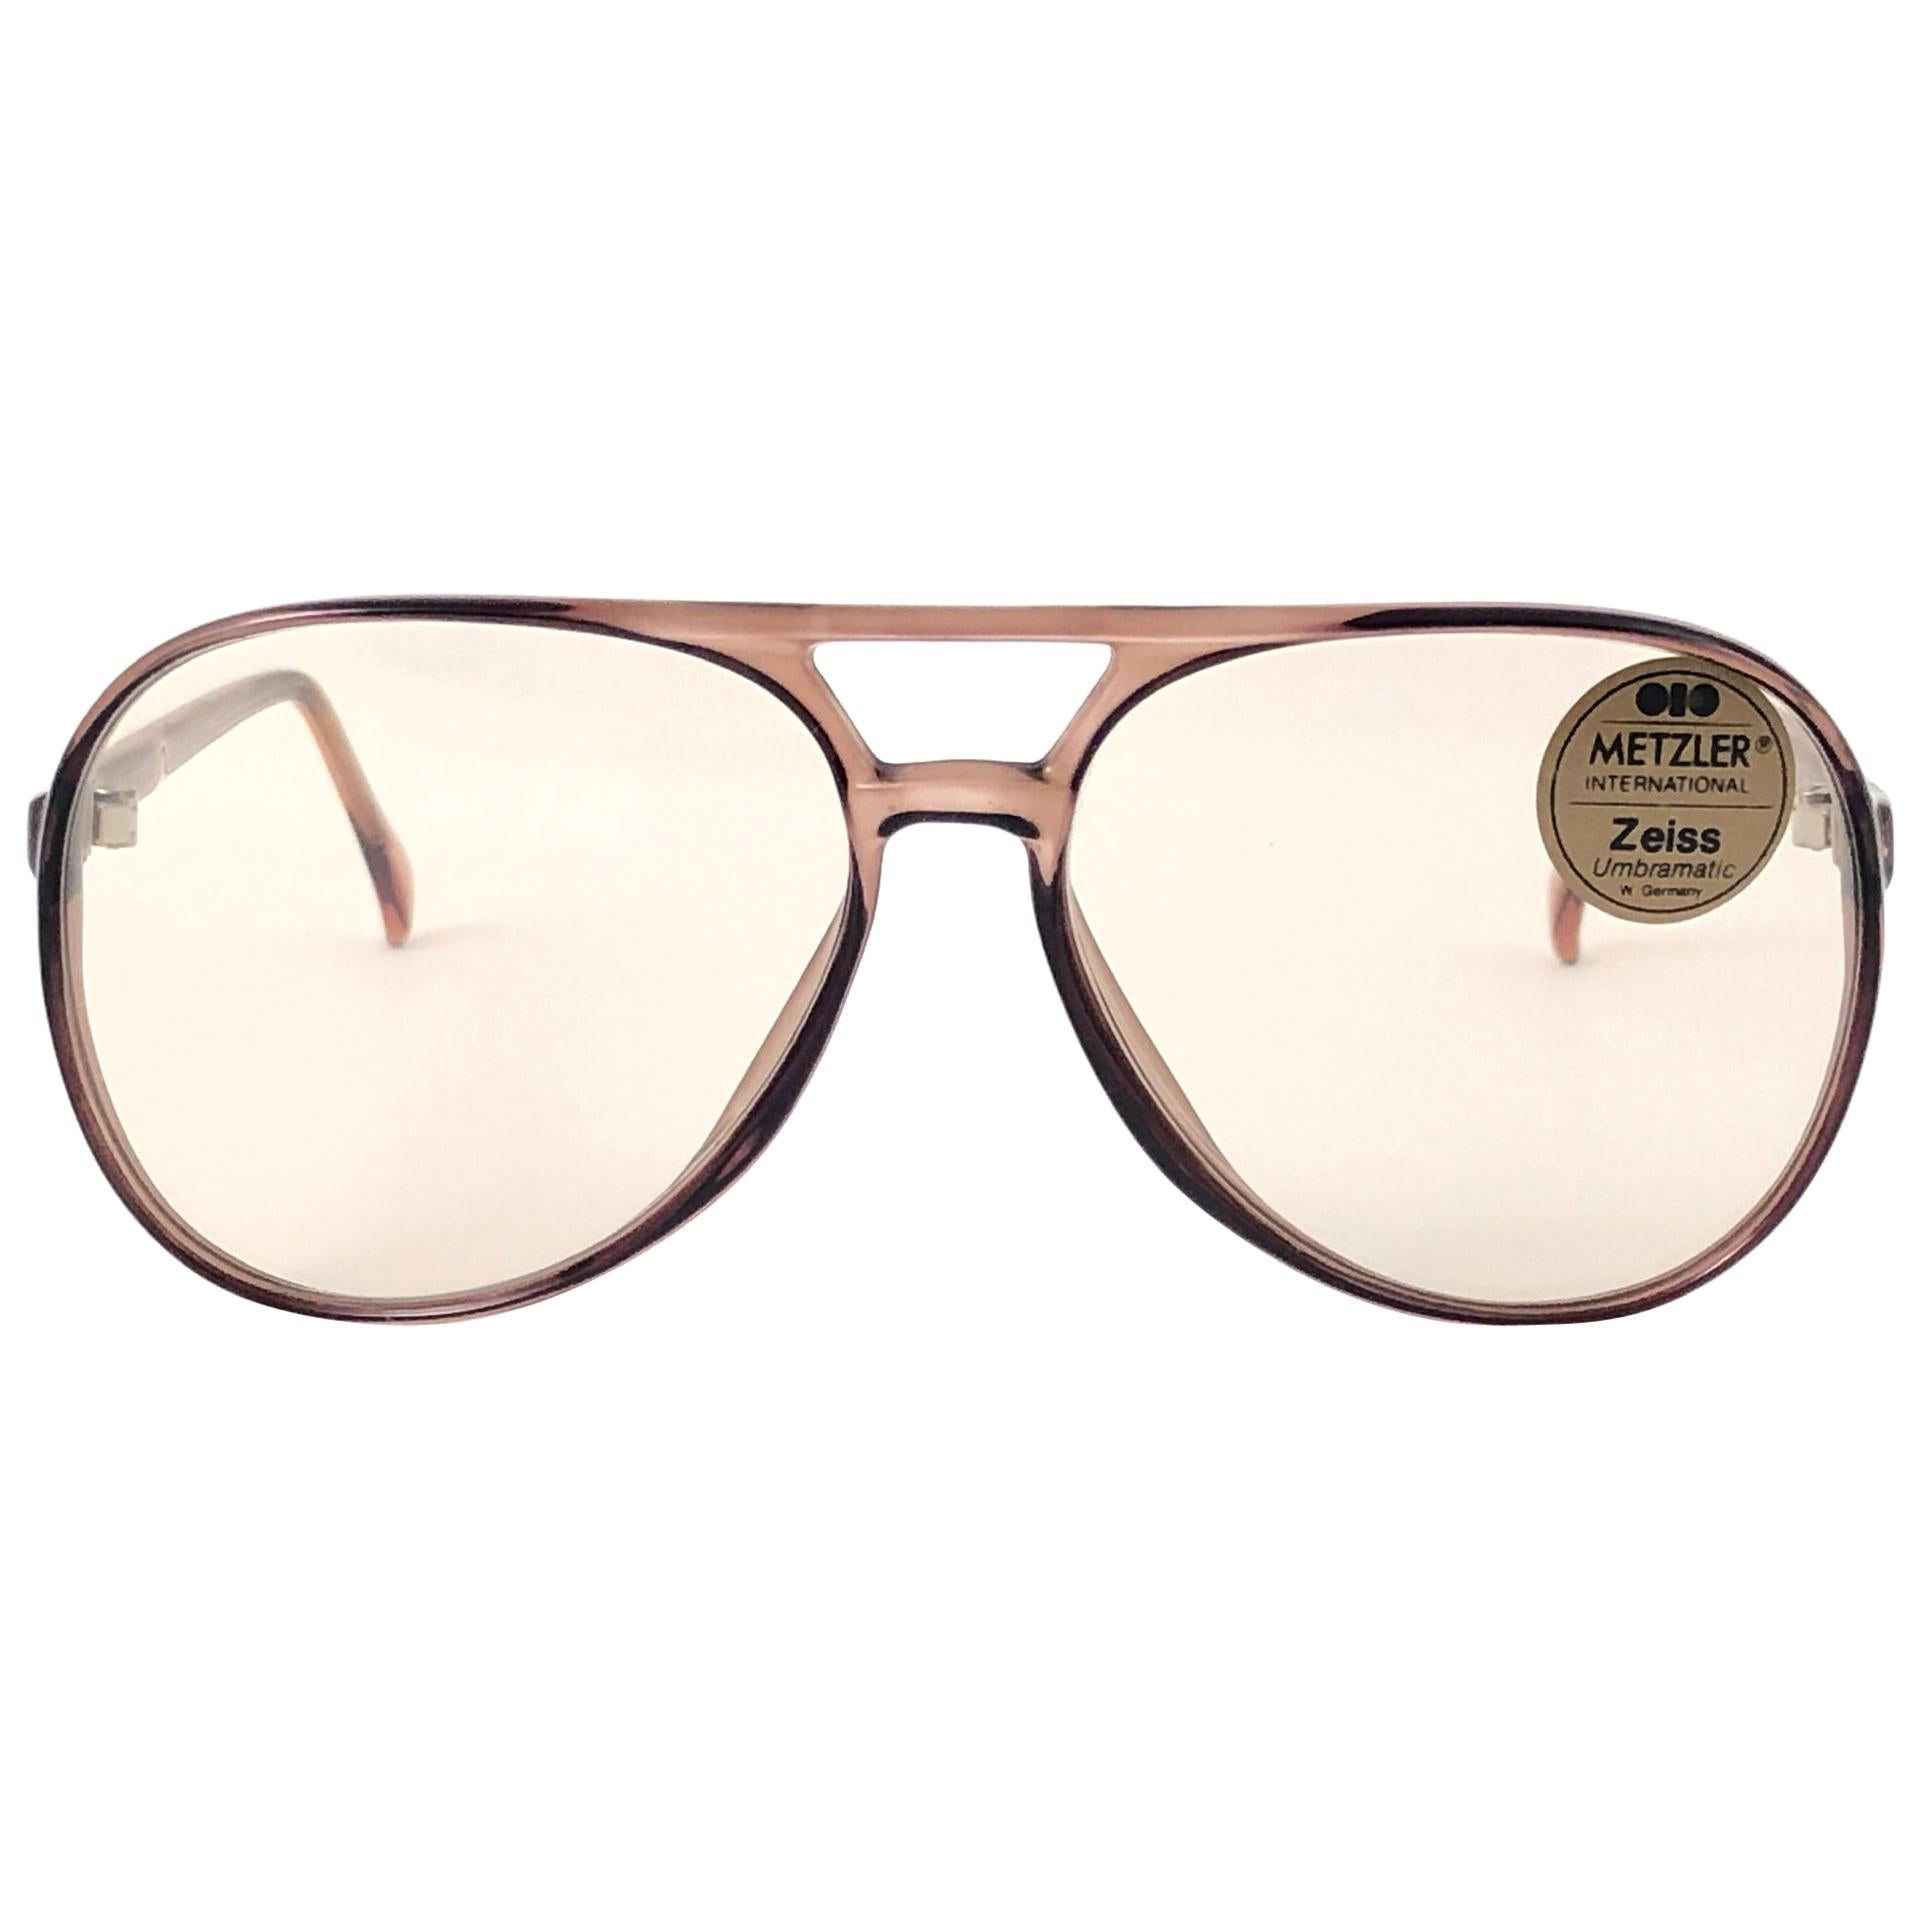 New Vintage Metzler Zeiss Umbramatic Aviator Sunglasses West Germany 1980's For Sale